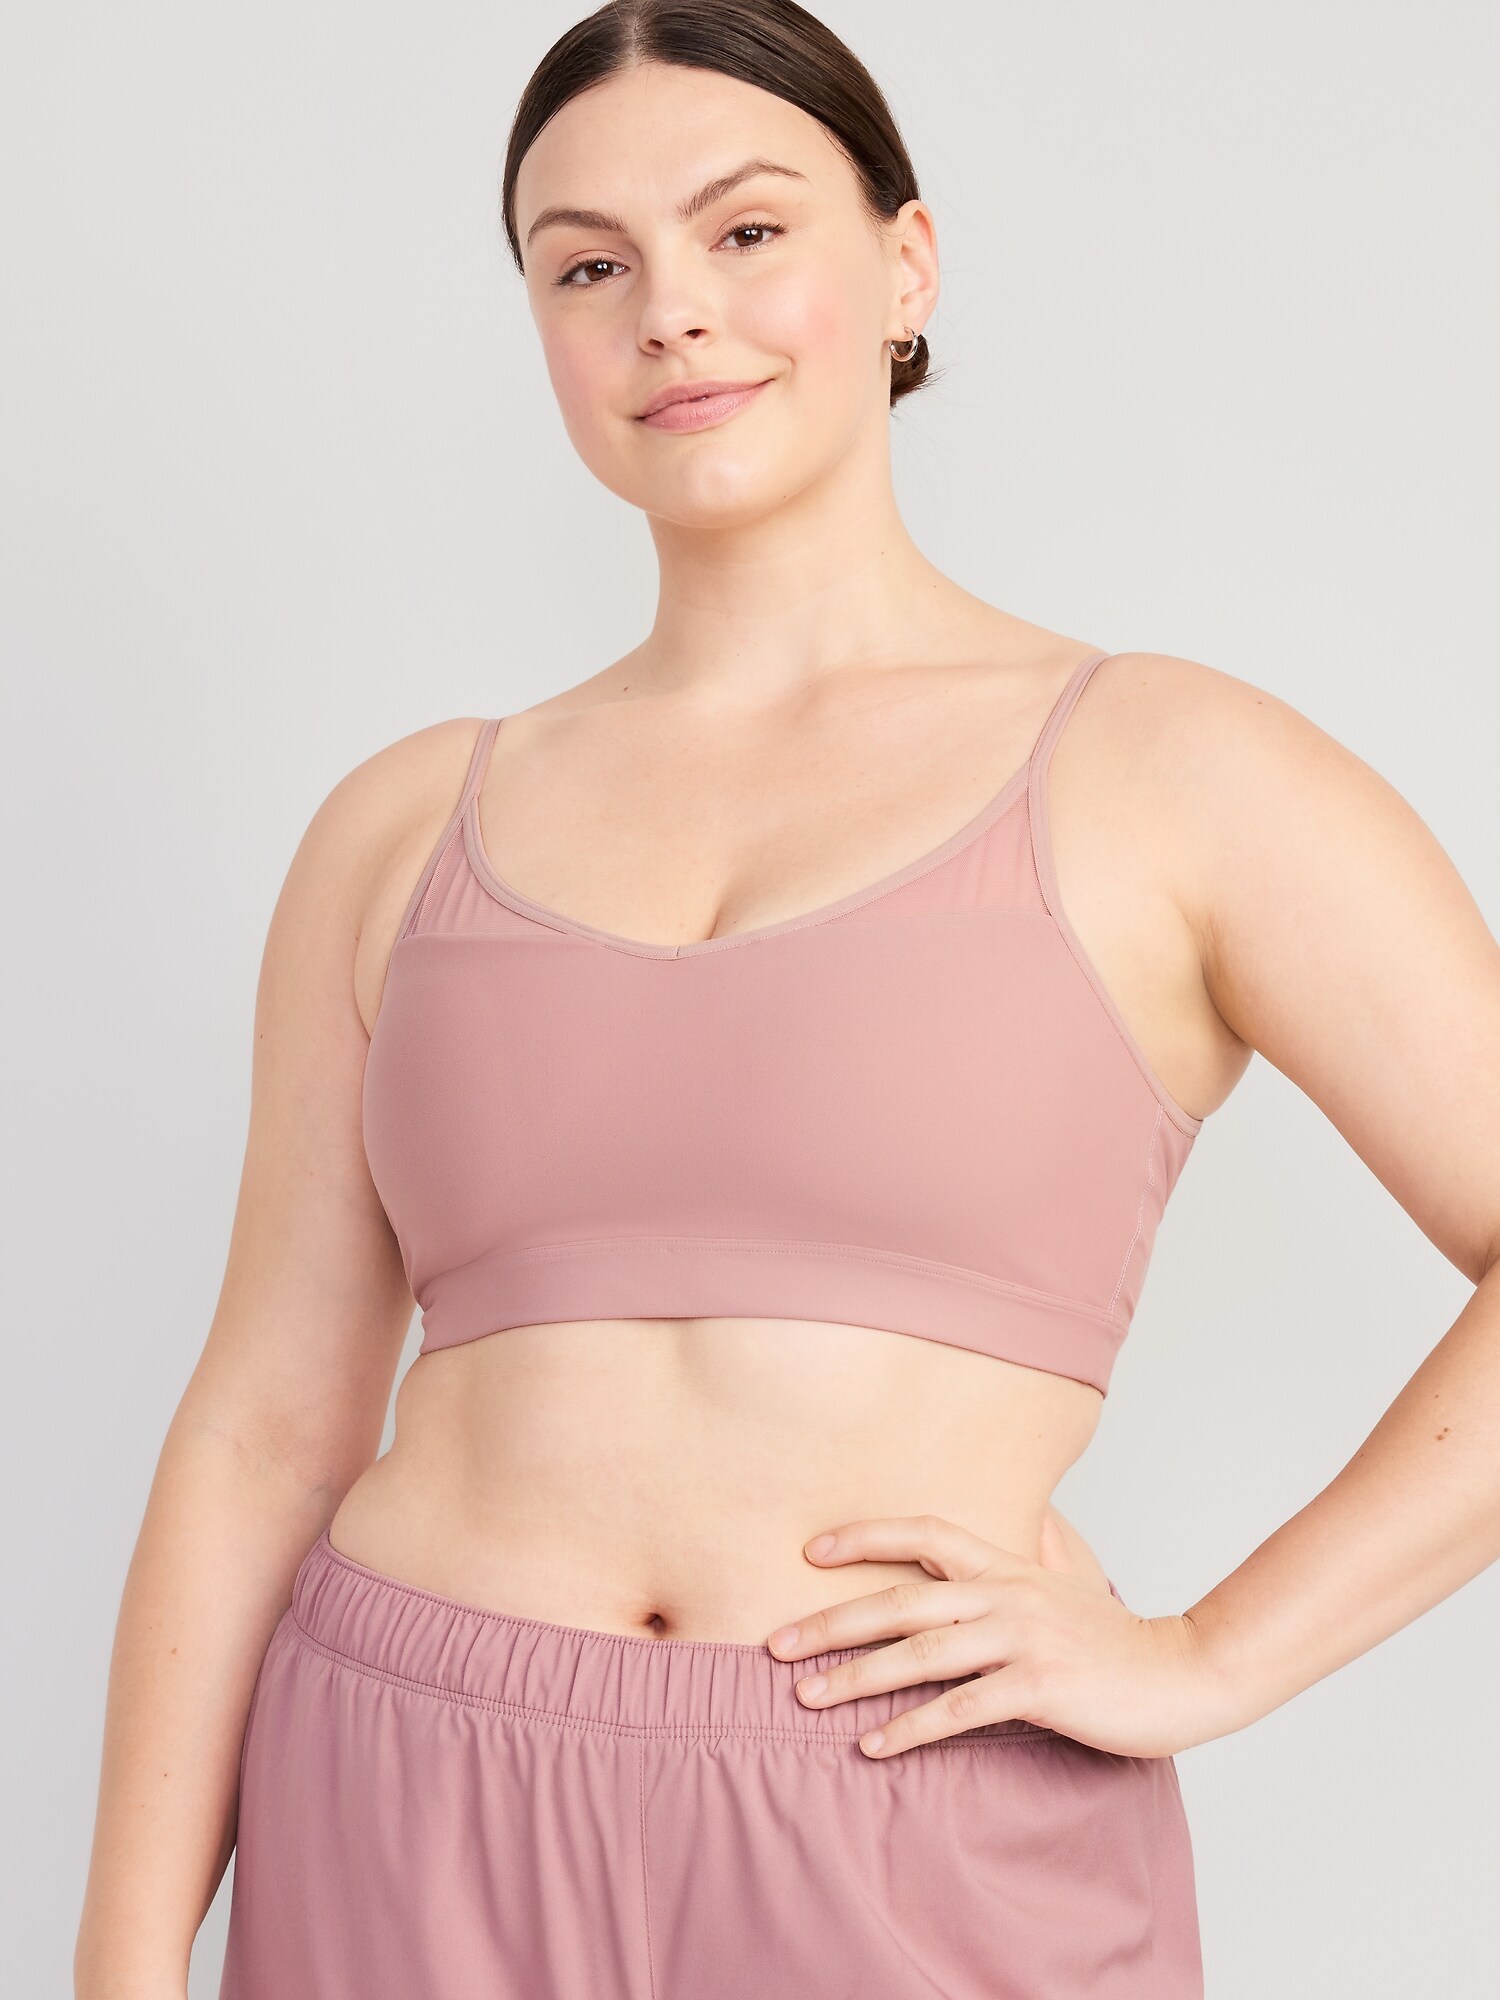 Solid Color Back Cross Strong Support Seamed Sport Bra